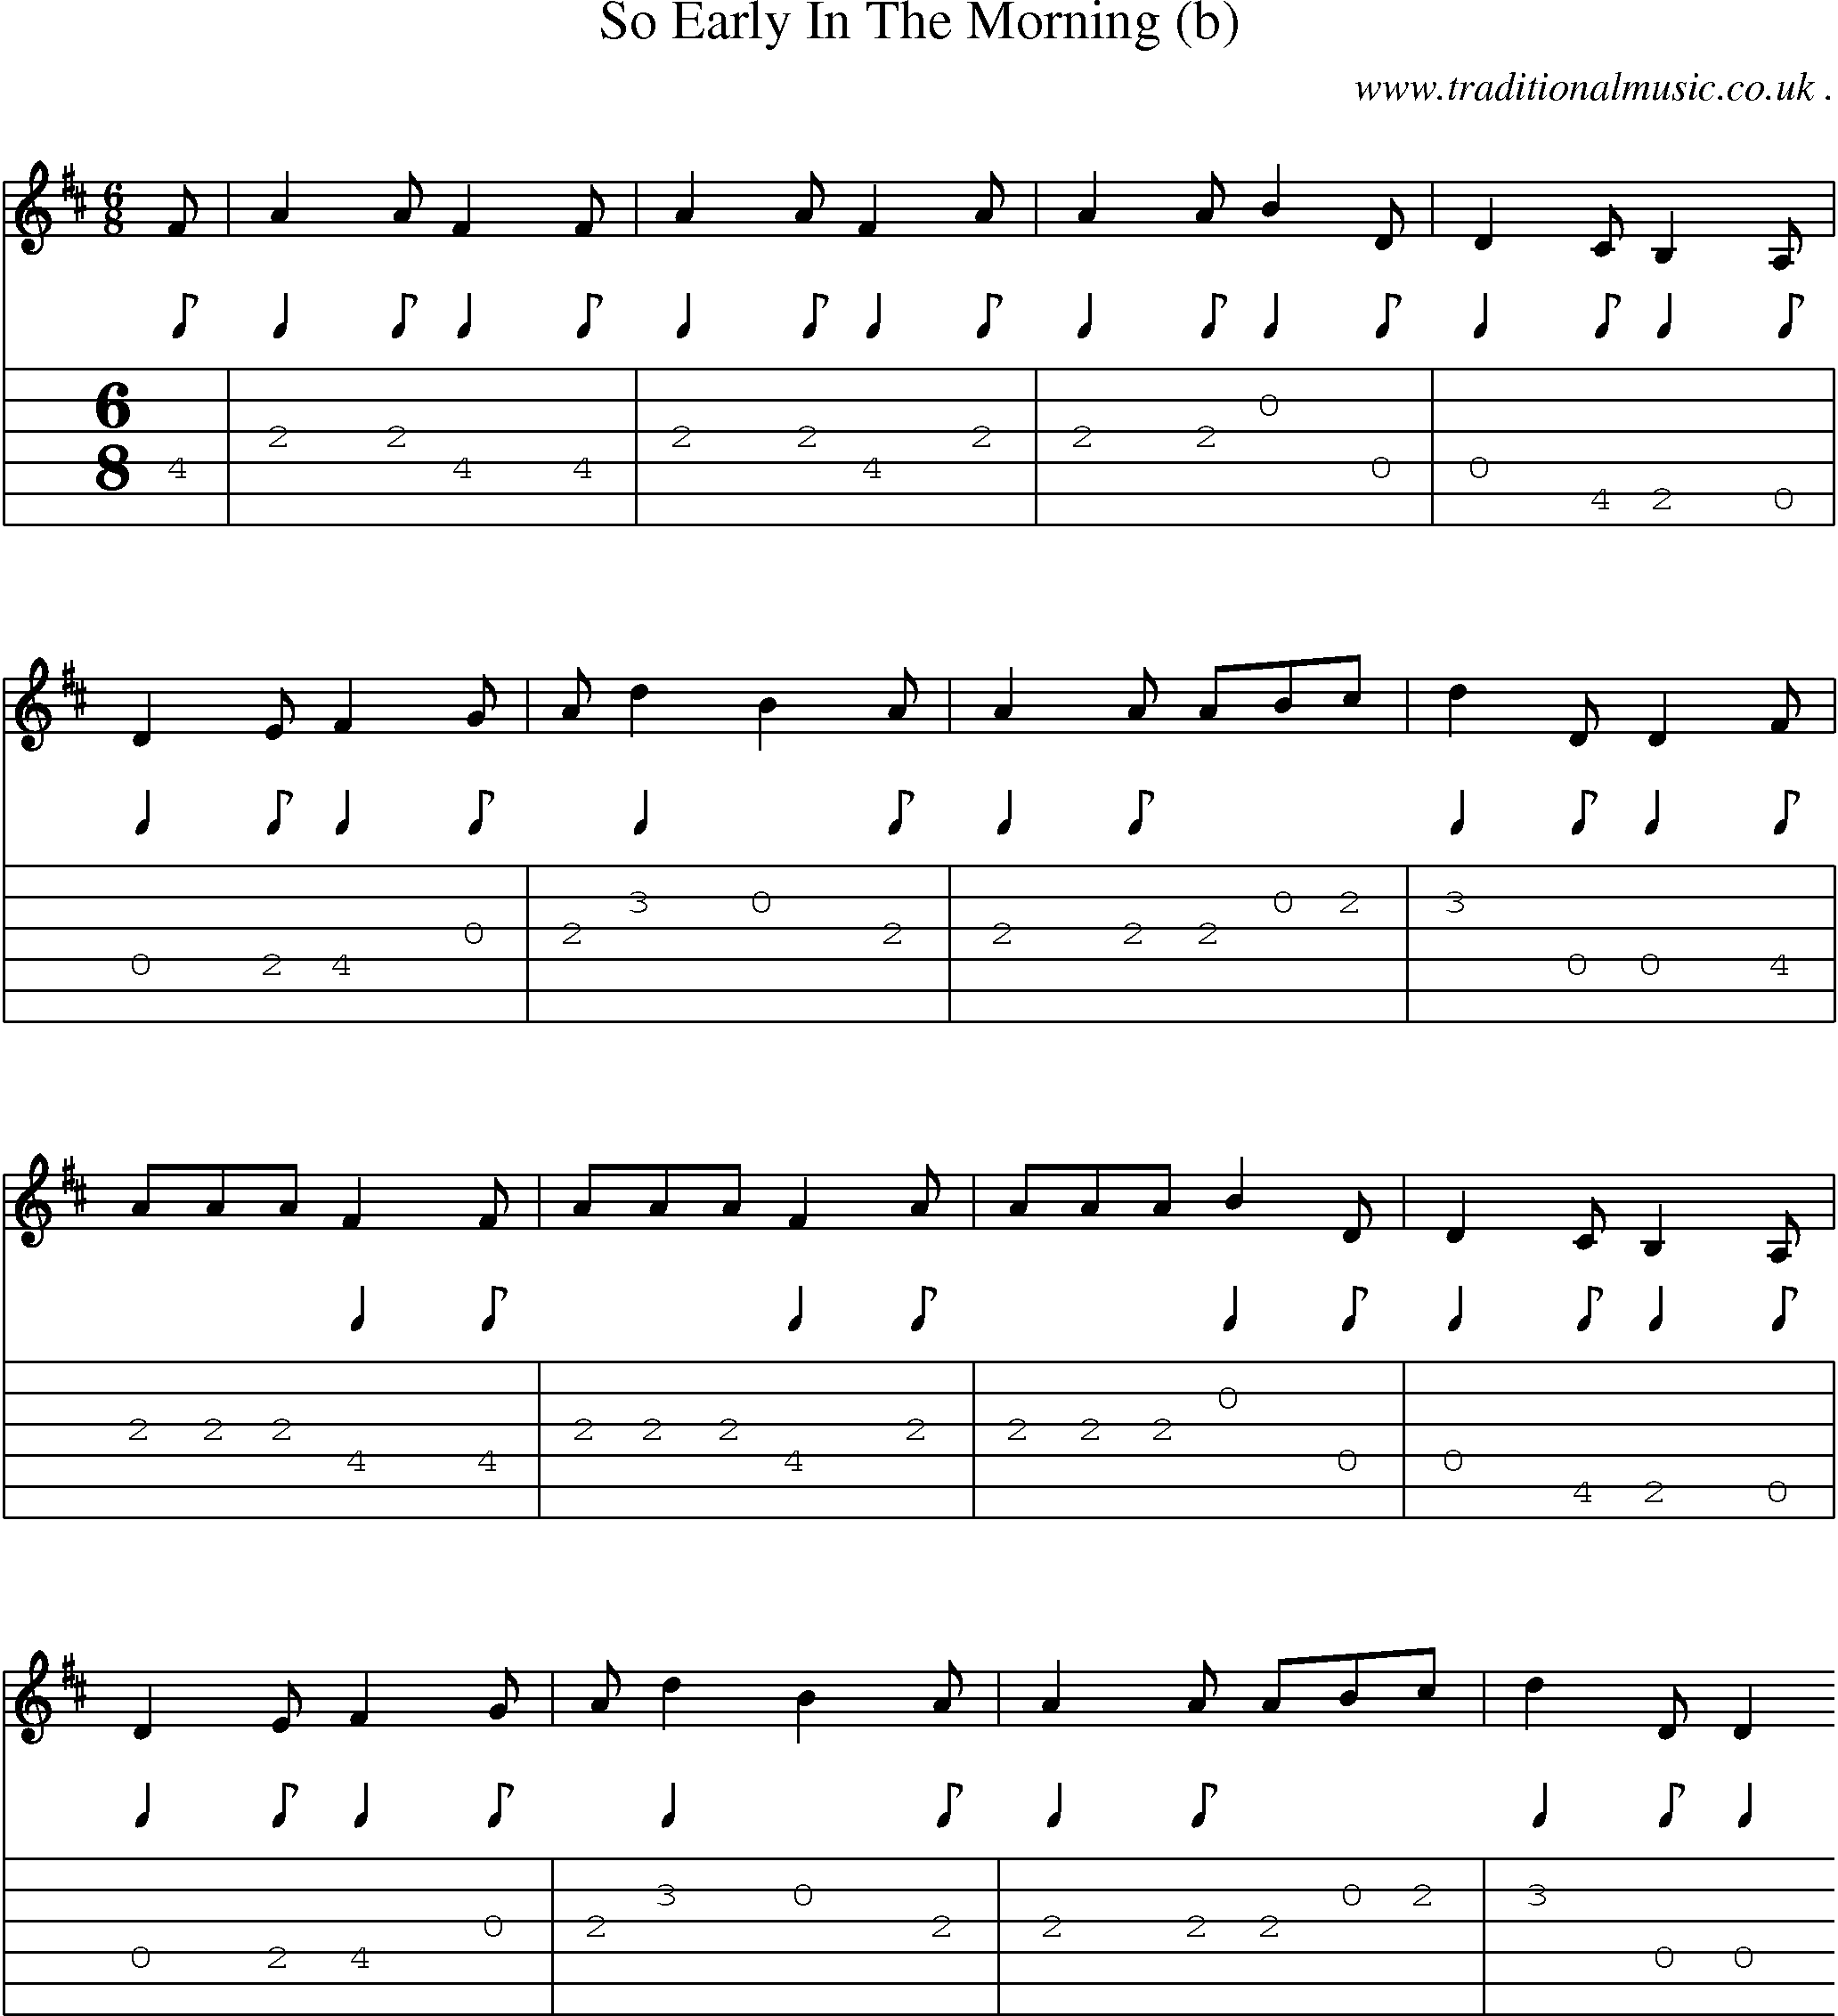 Sheet-Music and Guitar Tabs for So Early In The Morning (b)